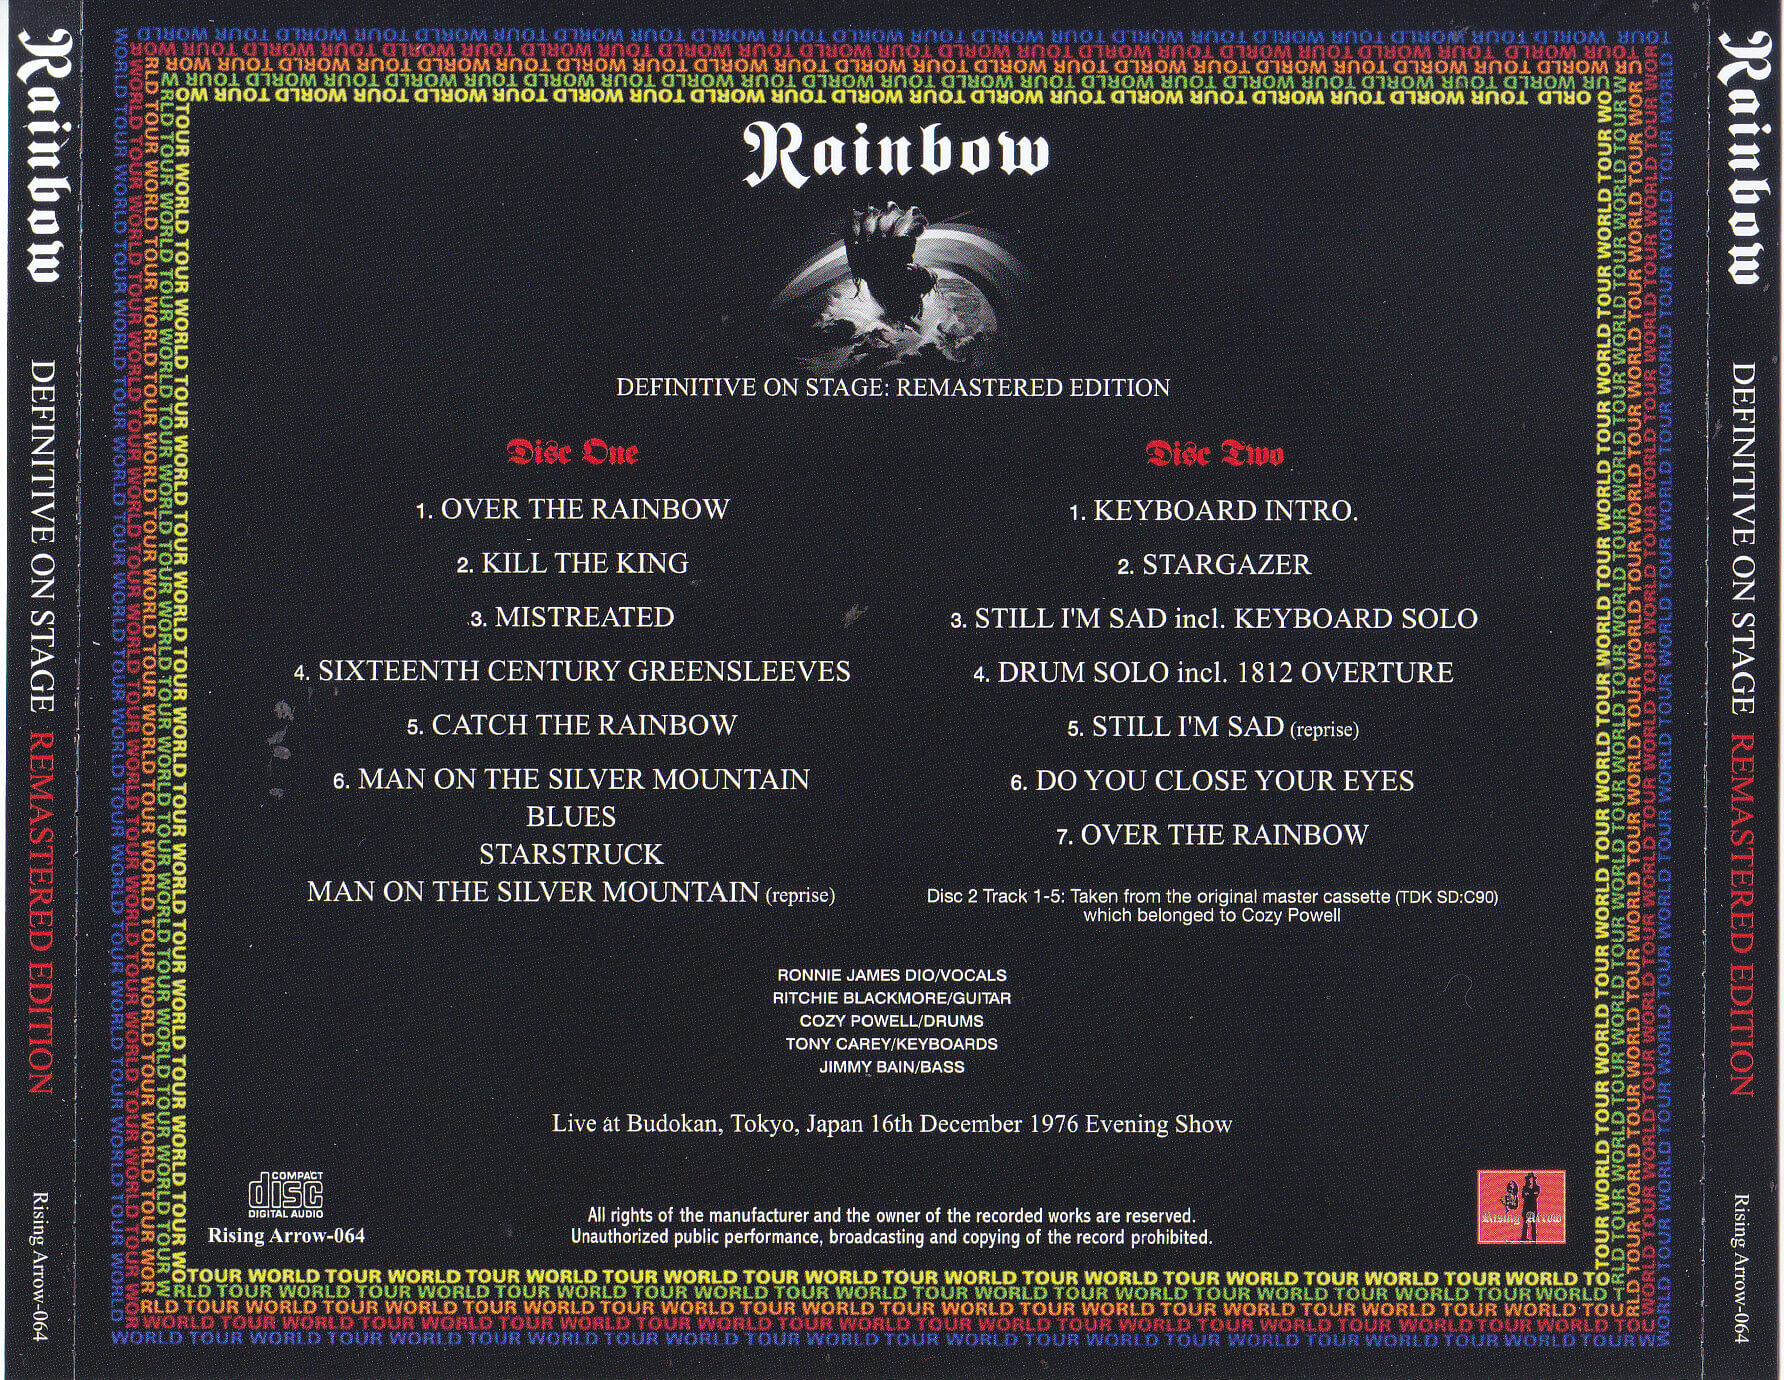 Rainbow / Definitive On Stage Remastered Edition / 2CD+Ticket 